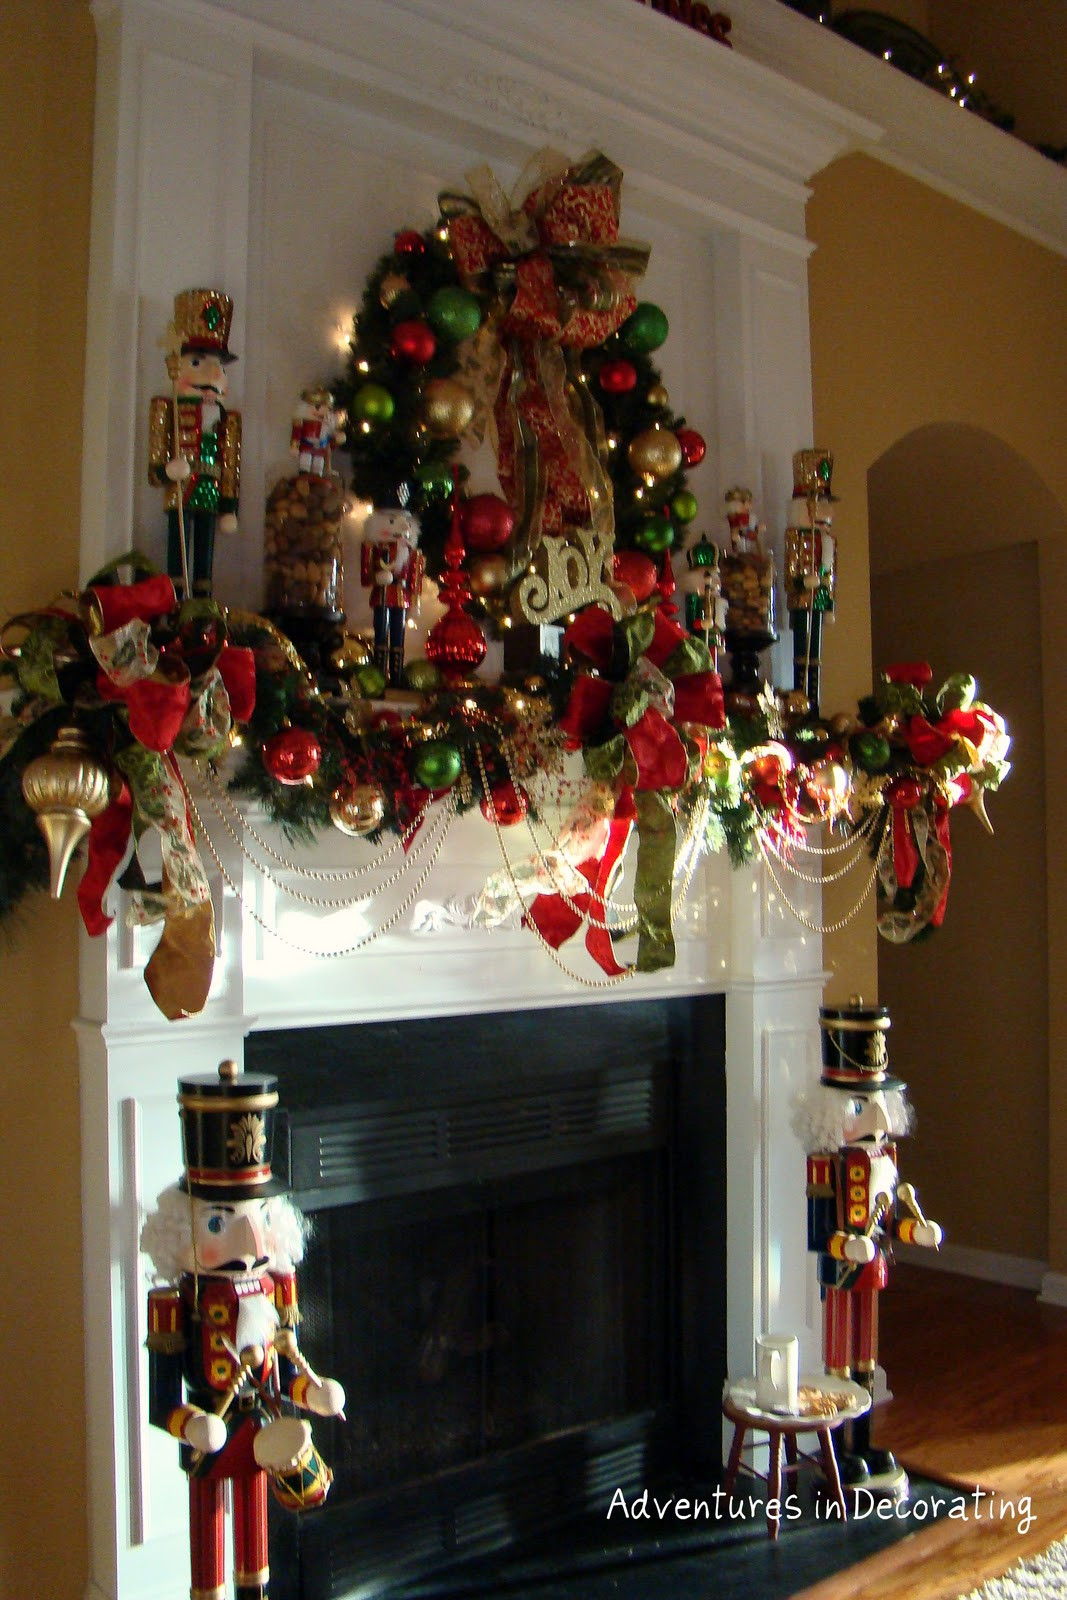 Fireplace Decorations For Christmas
 Adventures in Decorating Ready for Santa